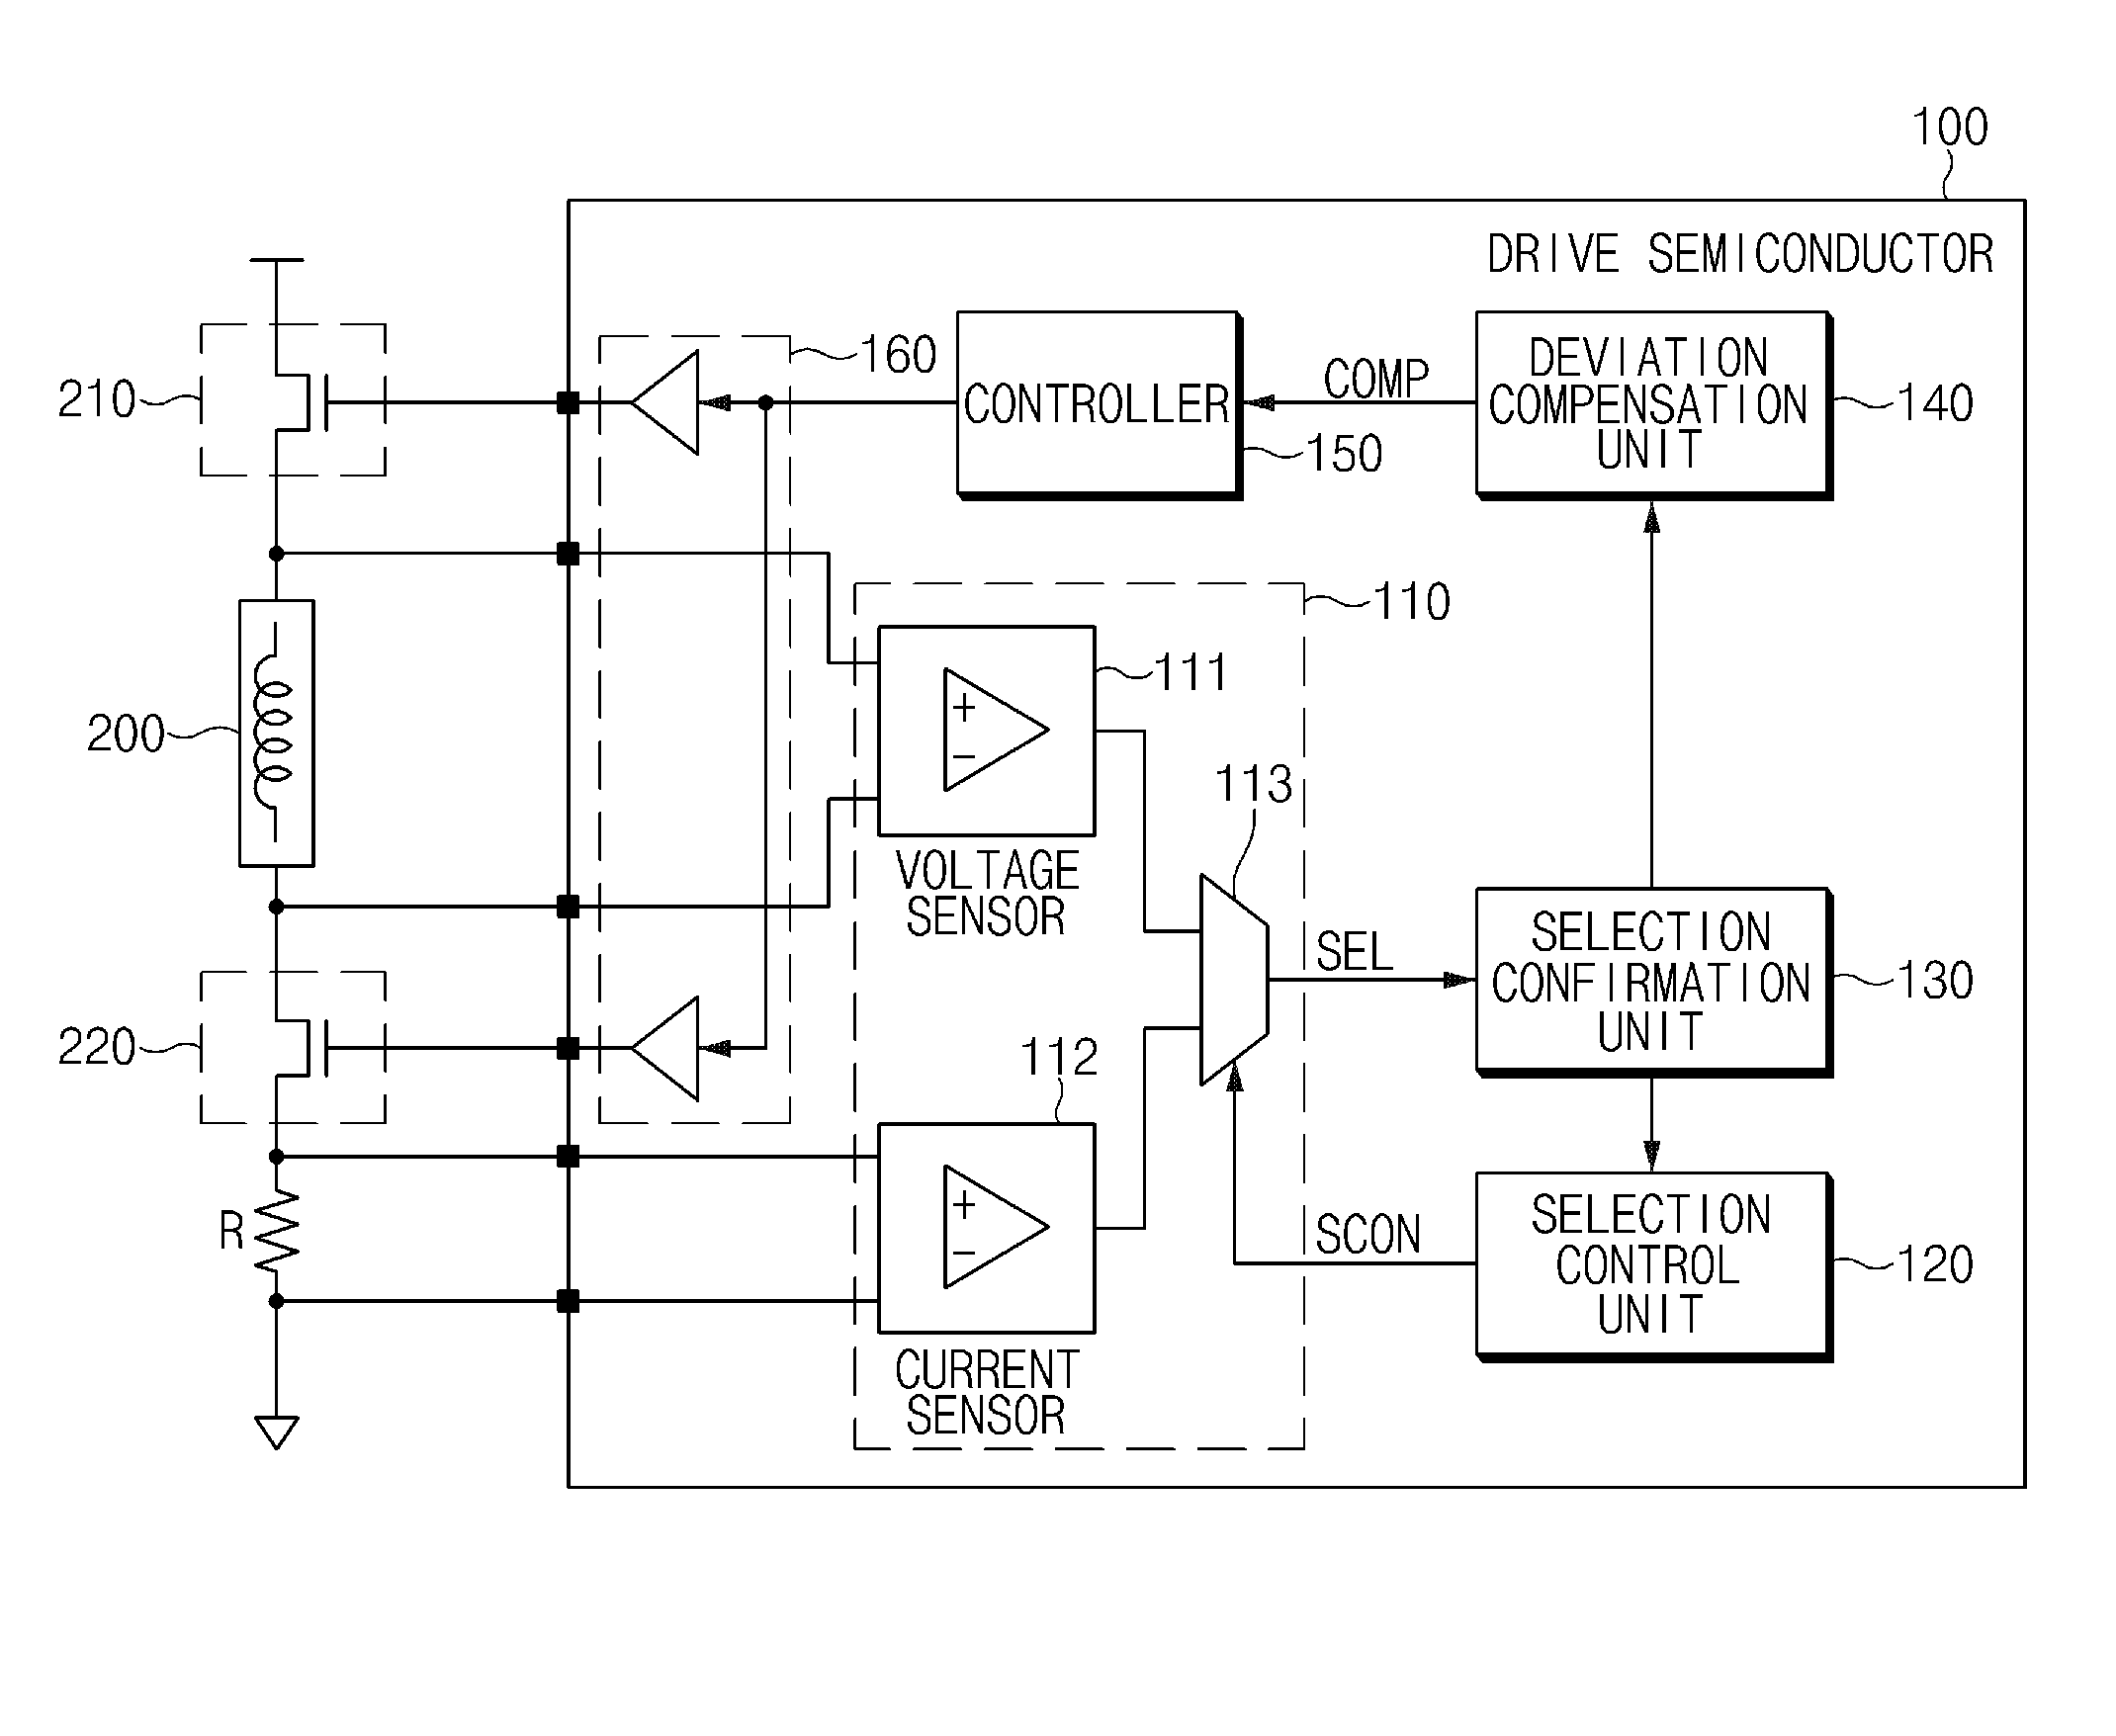 Device for correcting injector characteristics